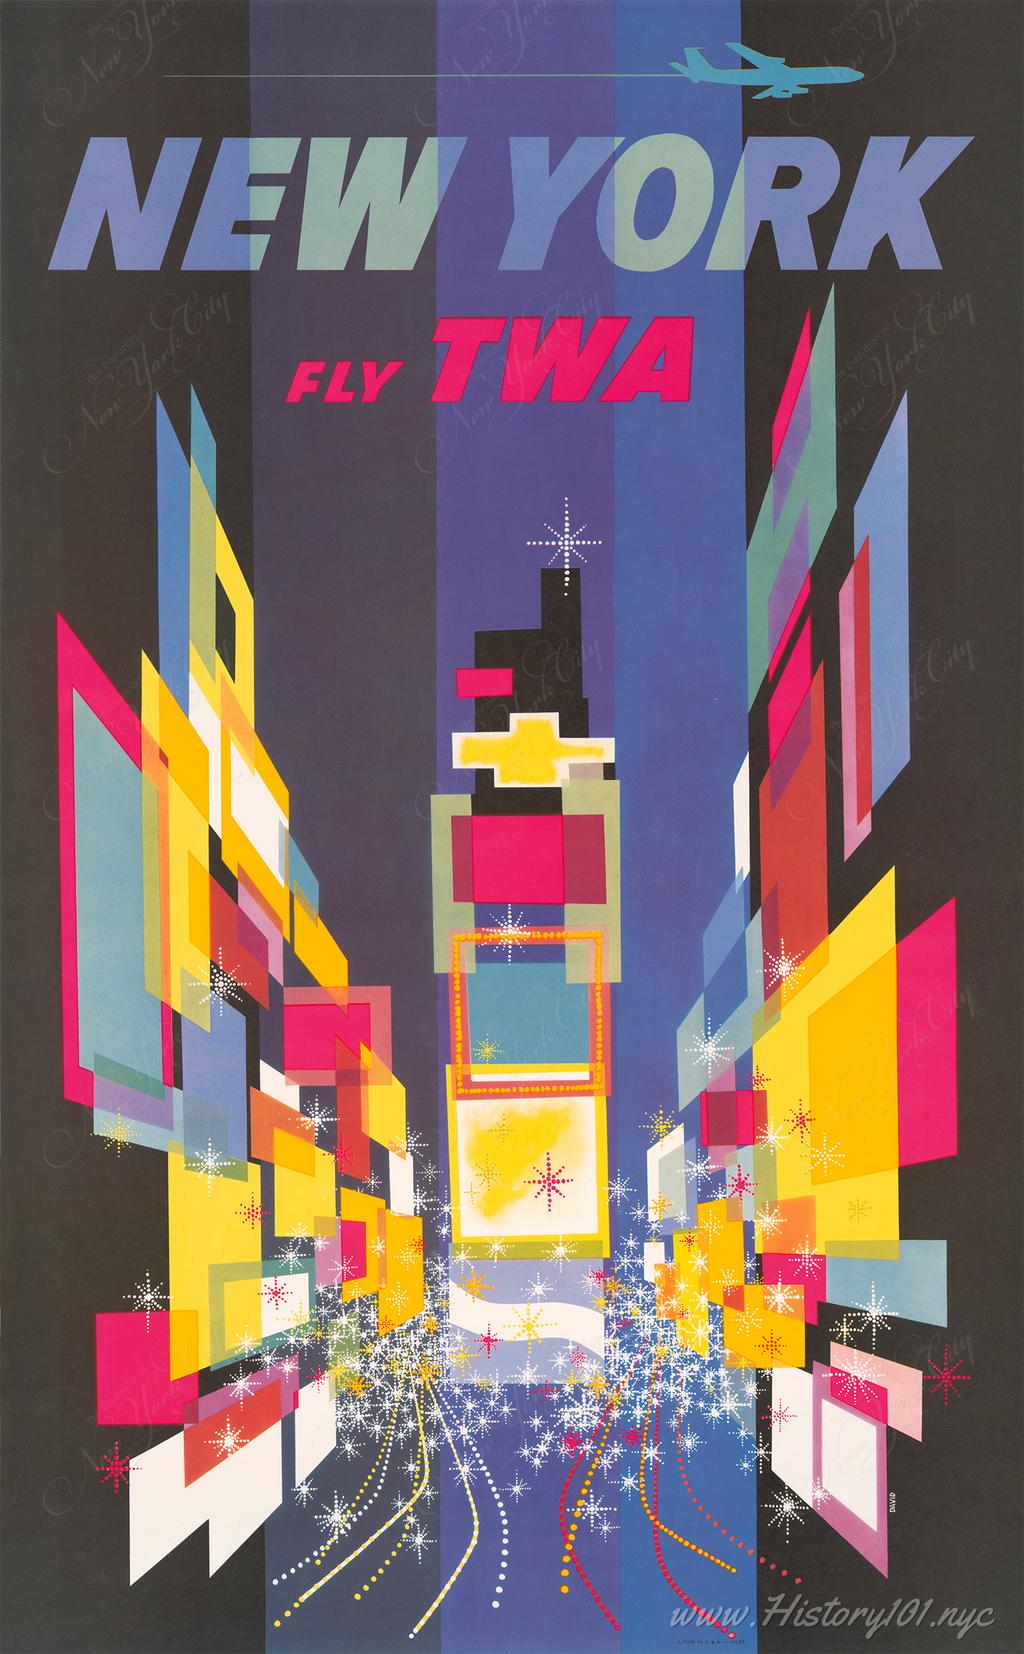 Art poster featuring an abstract interpretation of Times Square in New York with a TWA jet and jetstream at the top of the image.